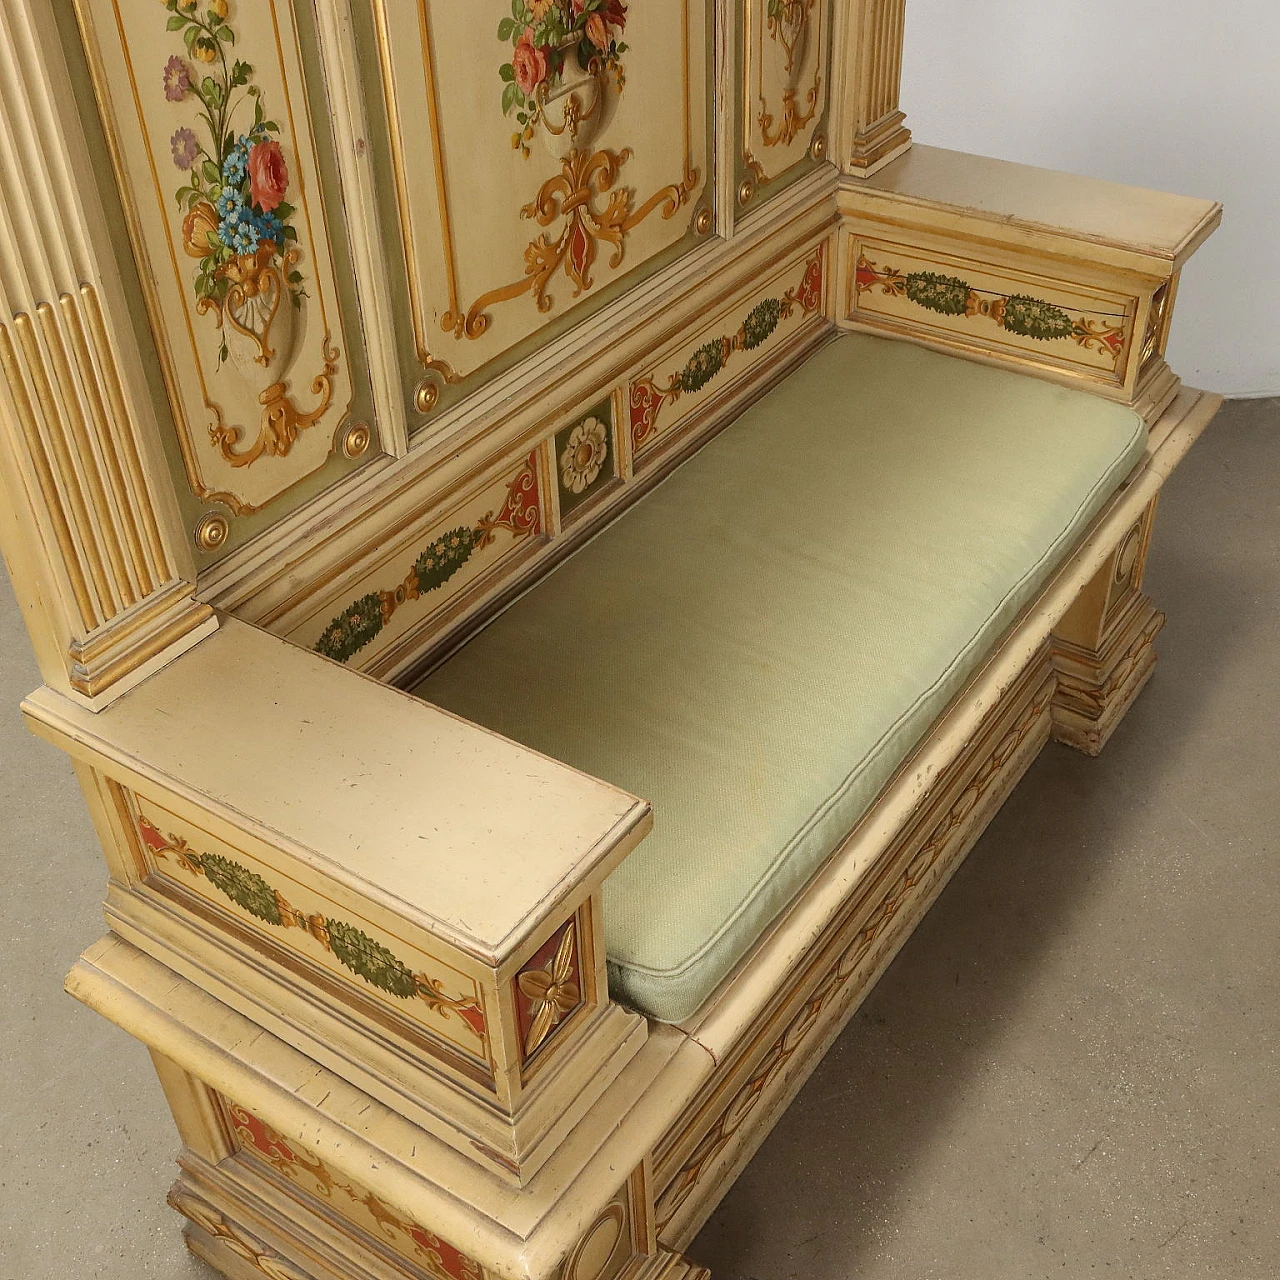 Laquered wooden bench with golden inserts and pillow 7